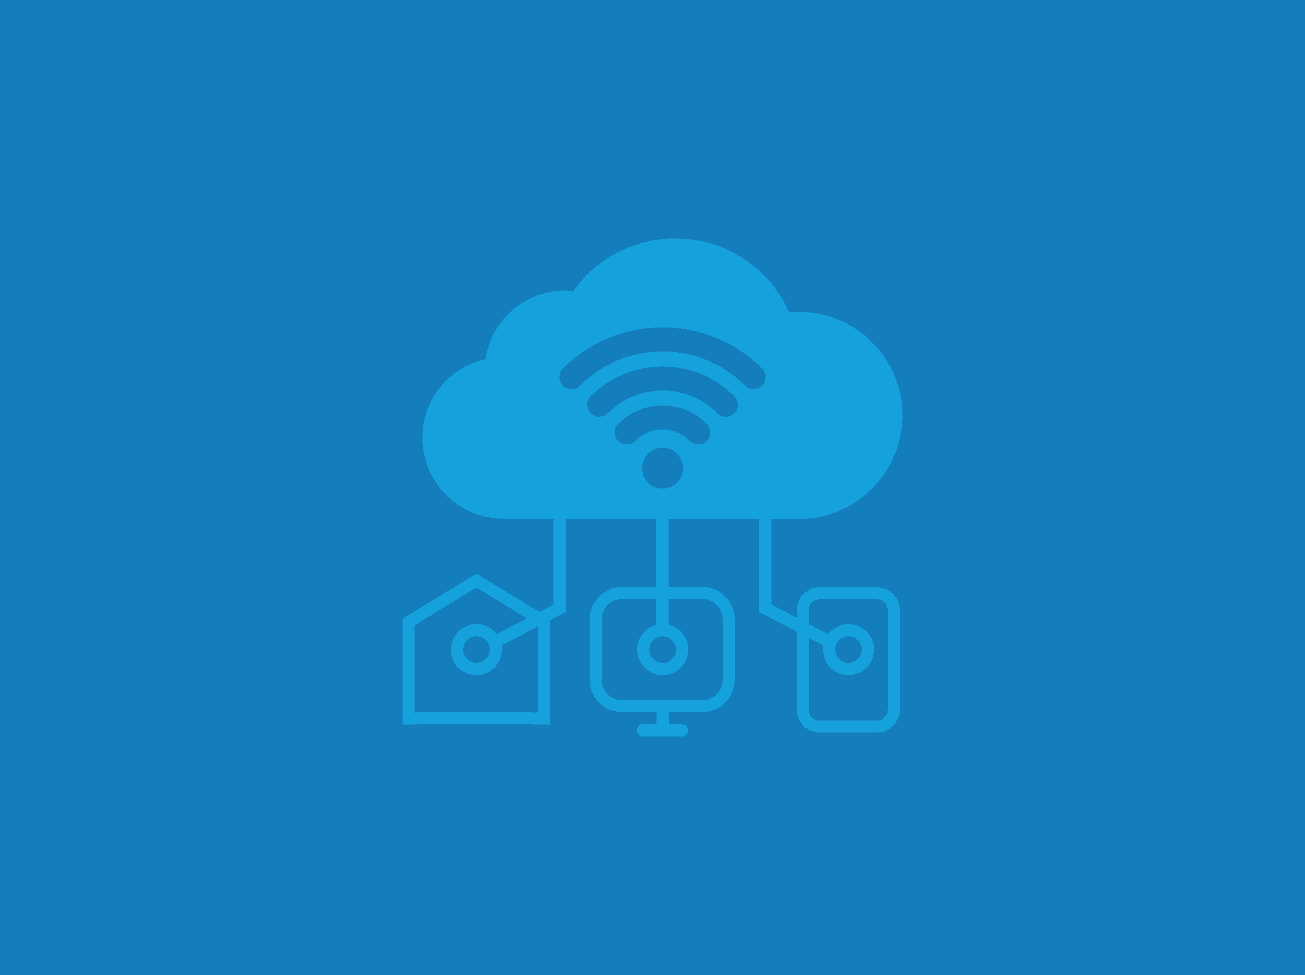 Outline of a blue cloud with a WiFi symbol connected to a house, computer monitor, and cell phone